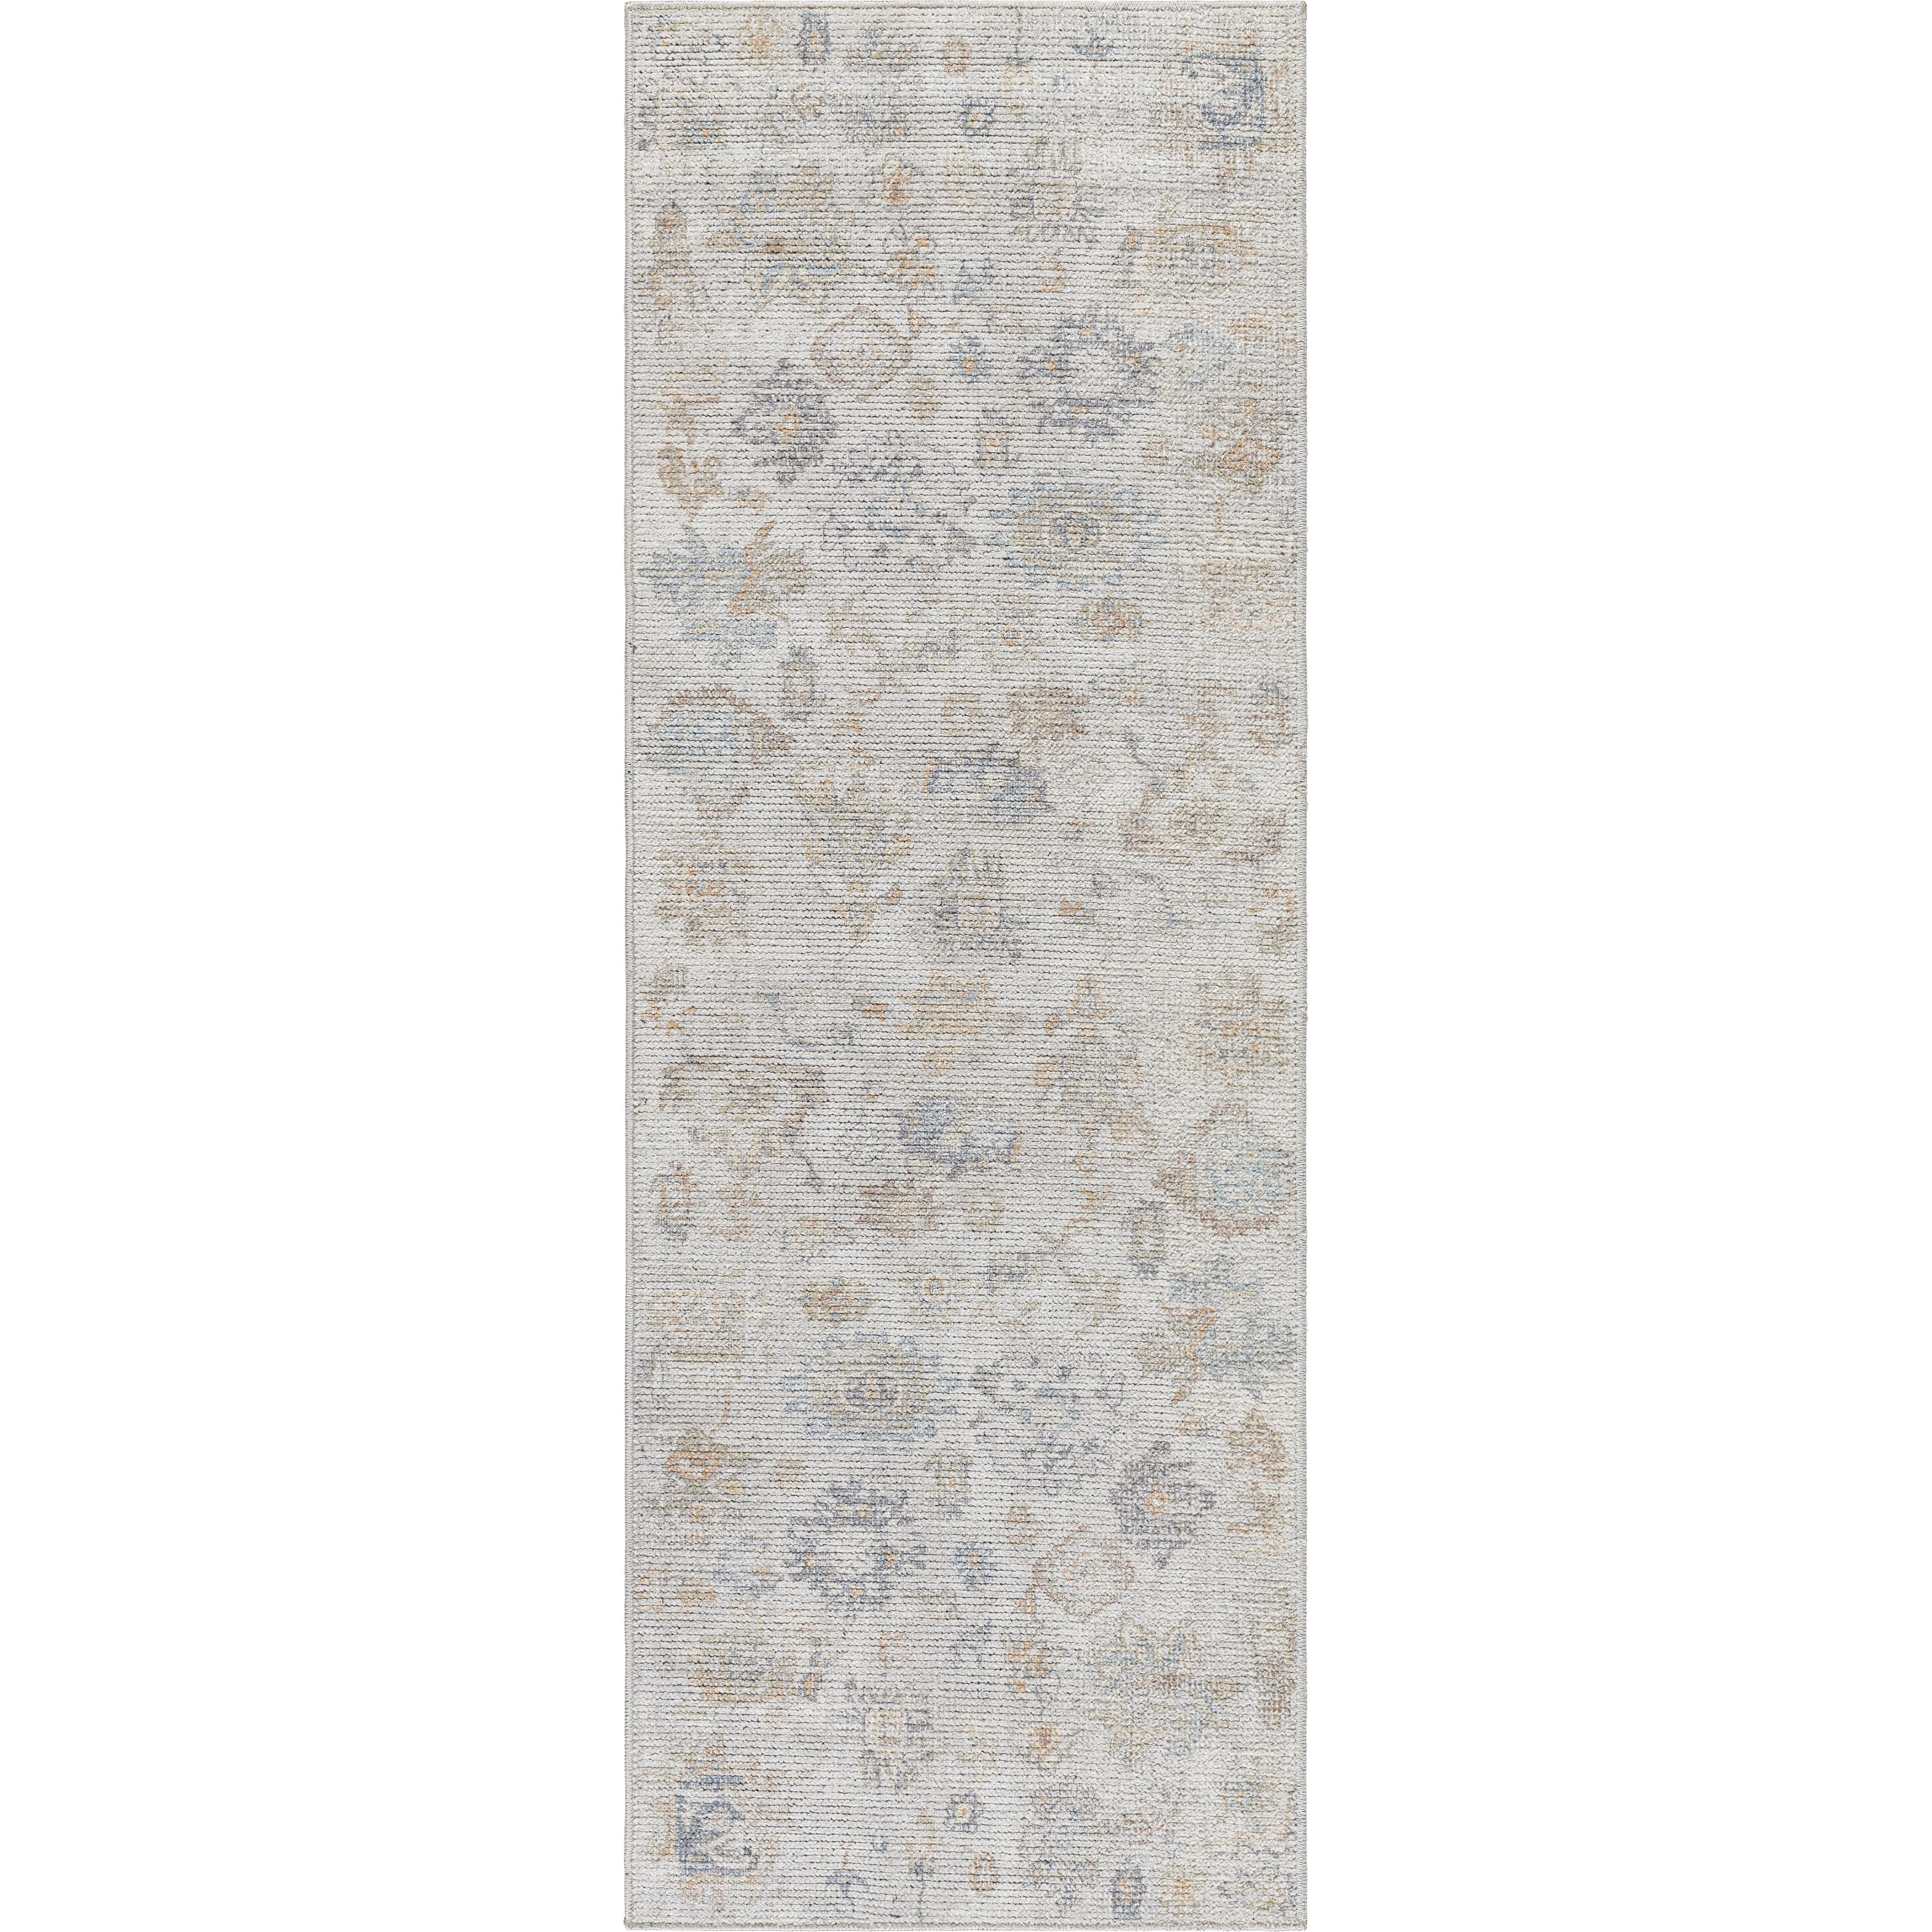 PNW Home x Surya available at Amethyst Home shipping to Australia, UK, and Canada. Organic modern design with easy to clean rugs for a family home in  the Austin metro area.